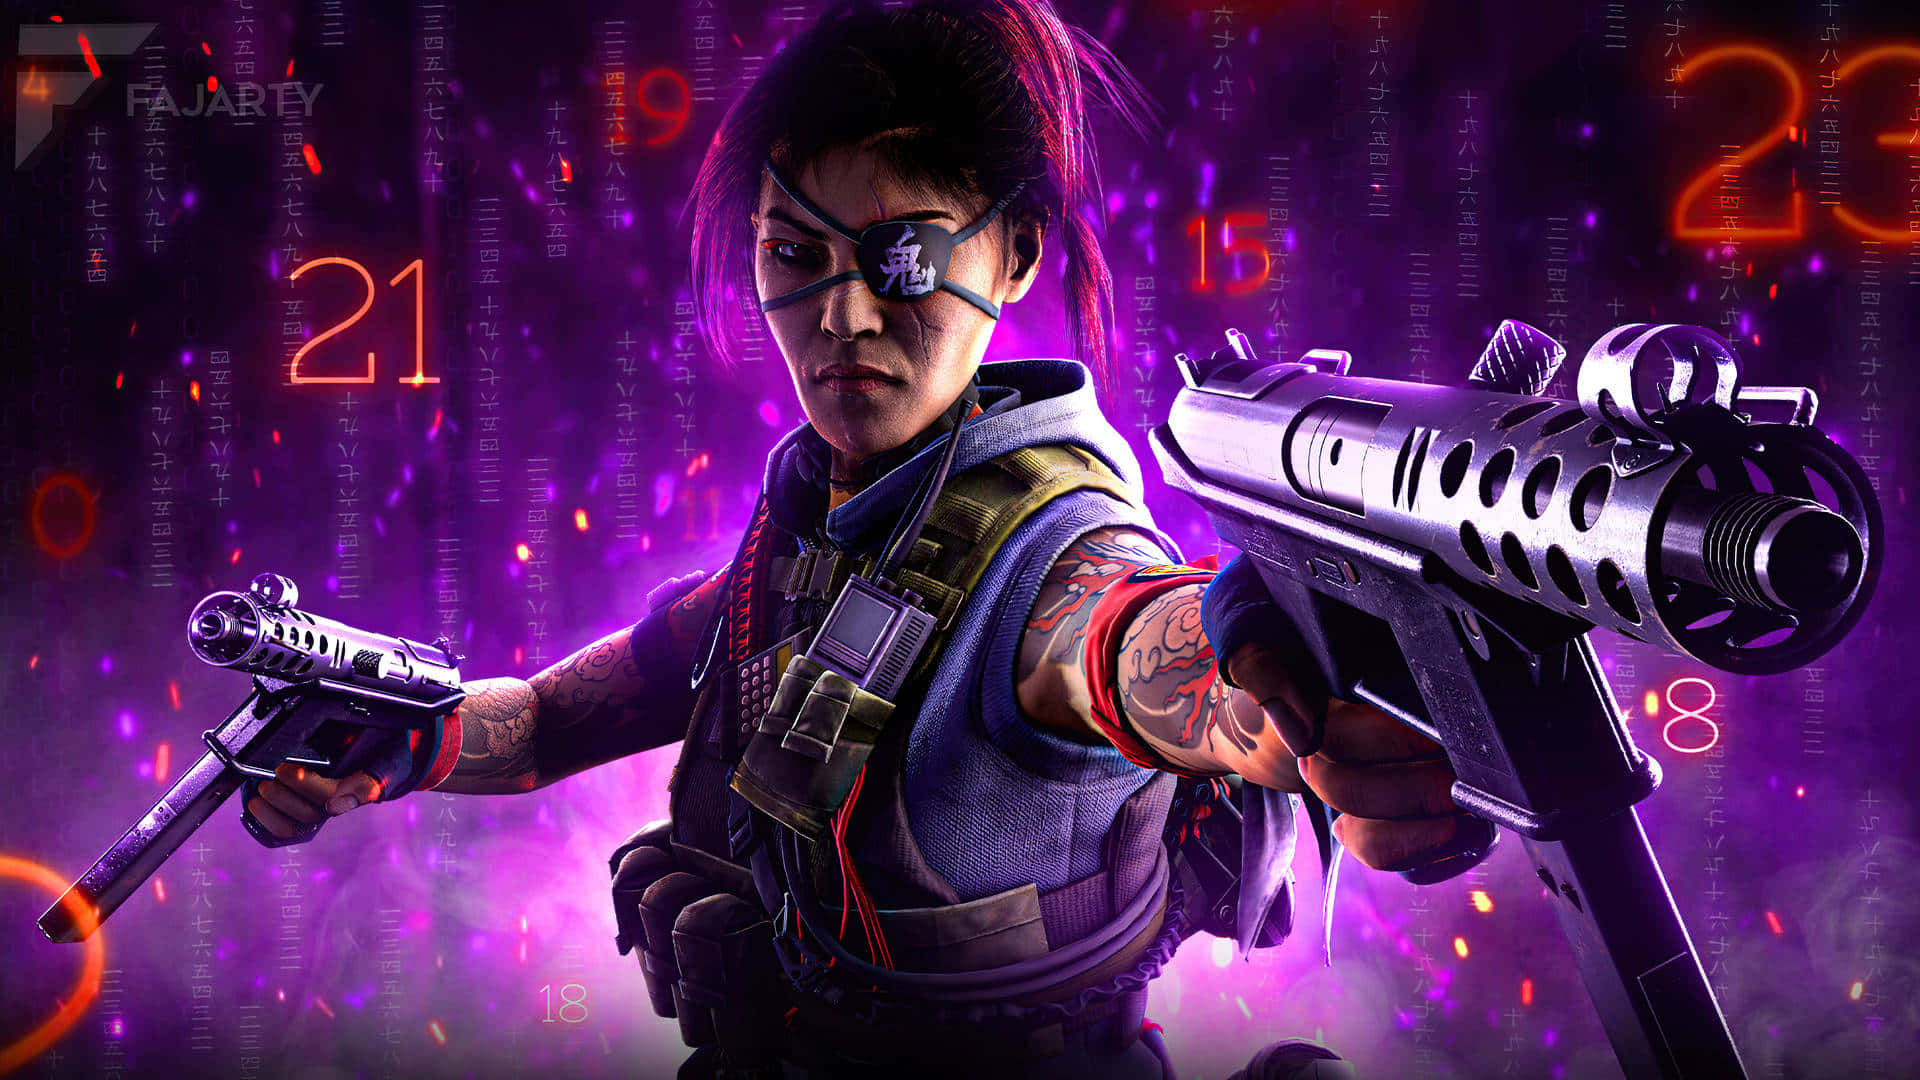 a woman holding a gun in front of a purple background